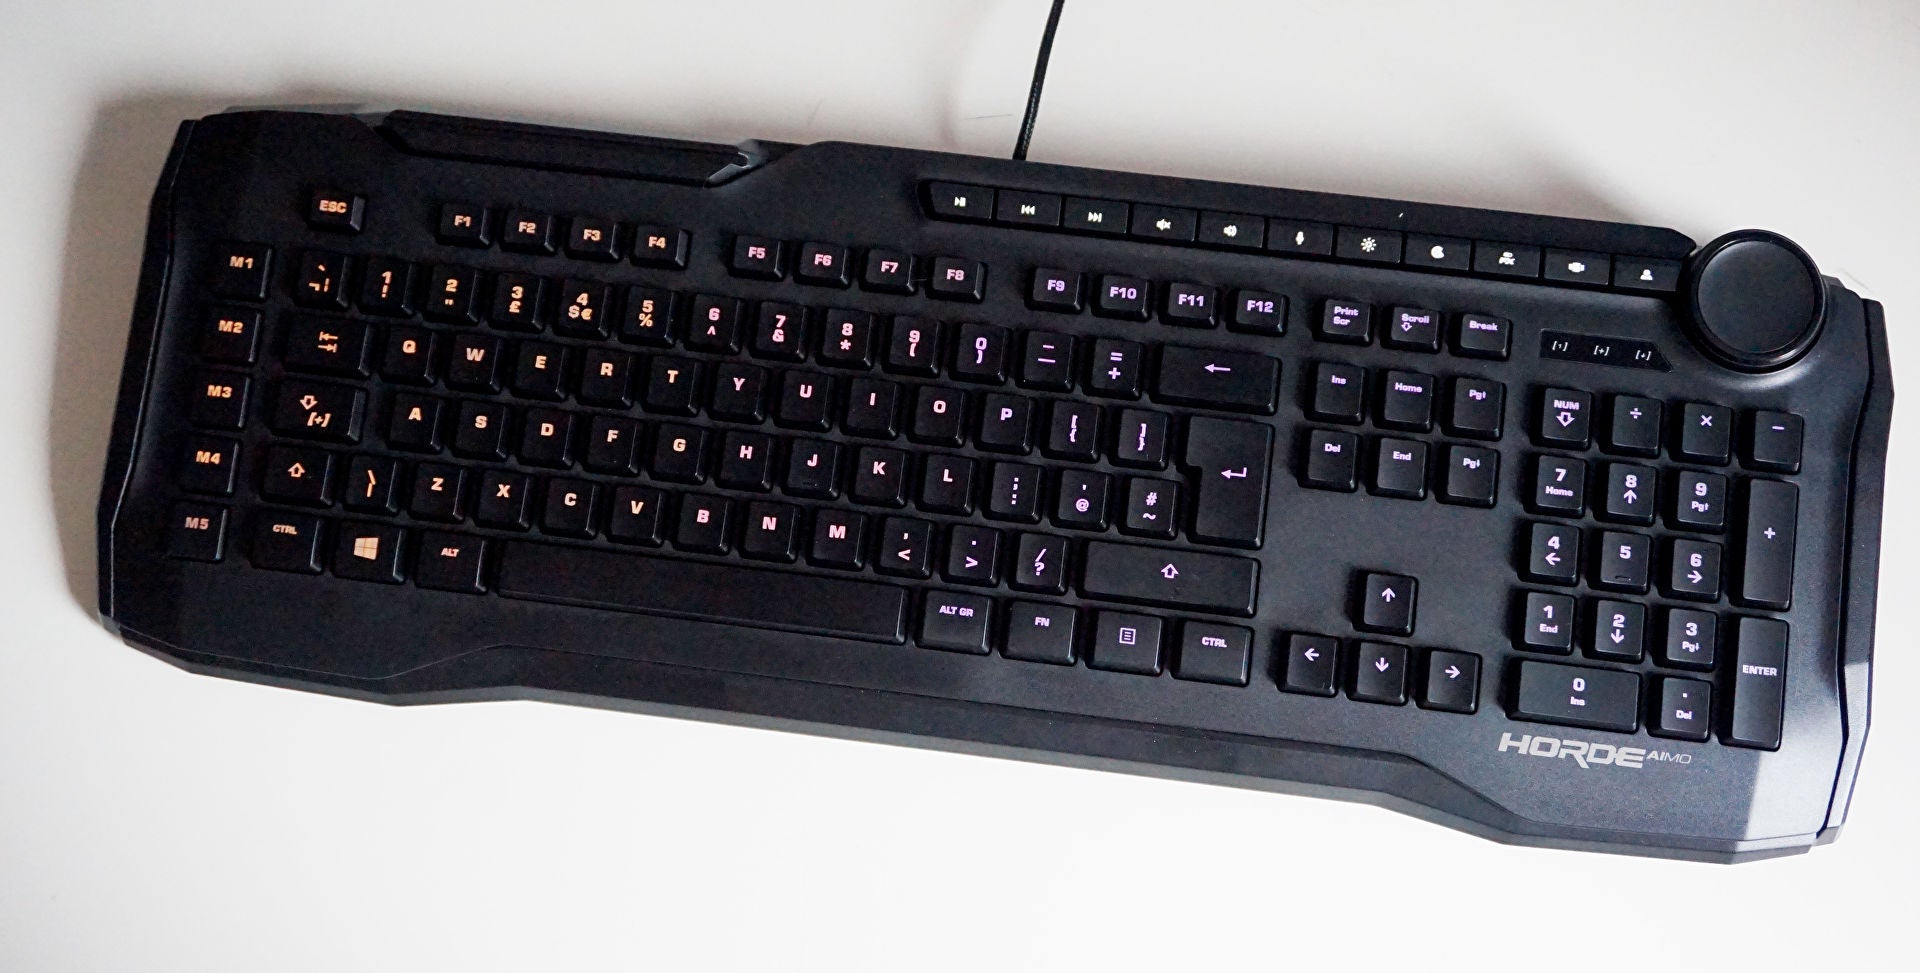 A photo of the Roccat Horde Aimo keyboard.